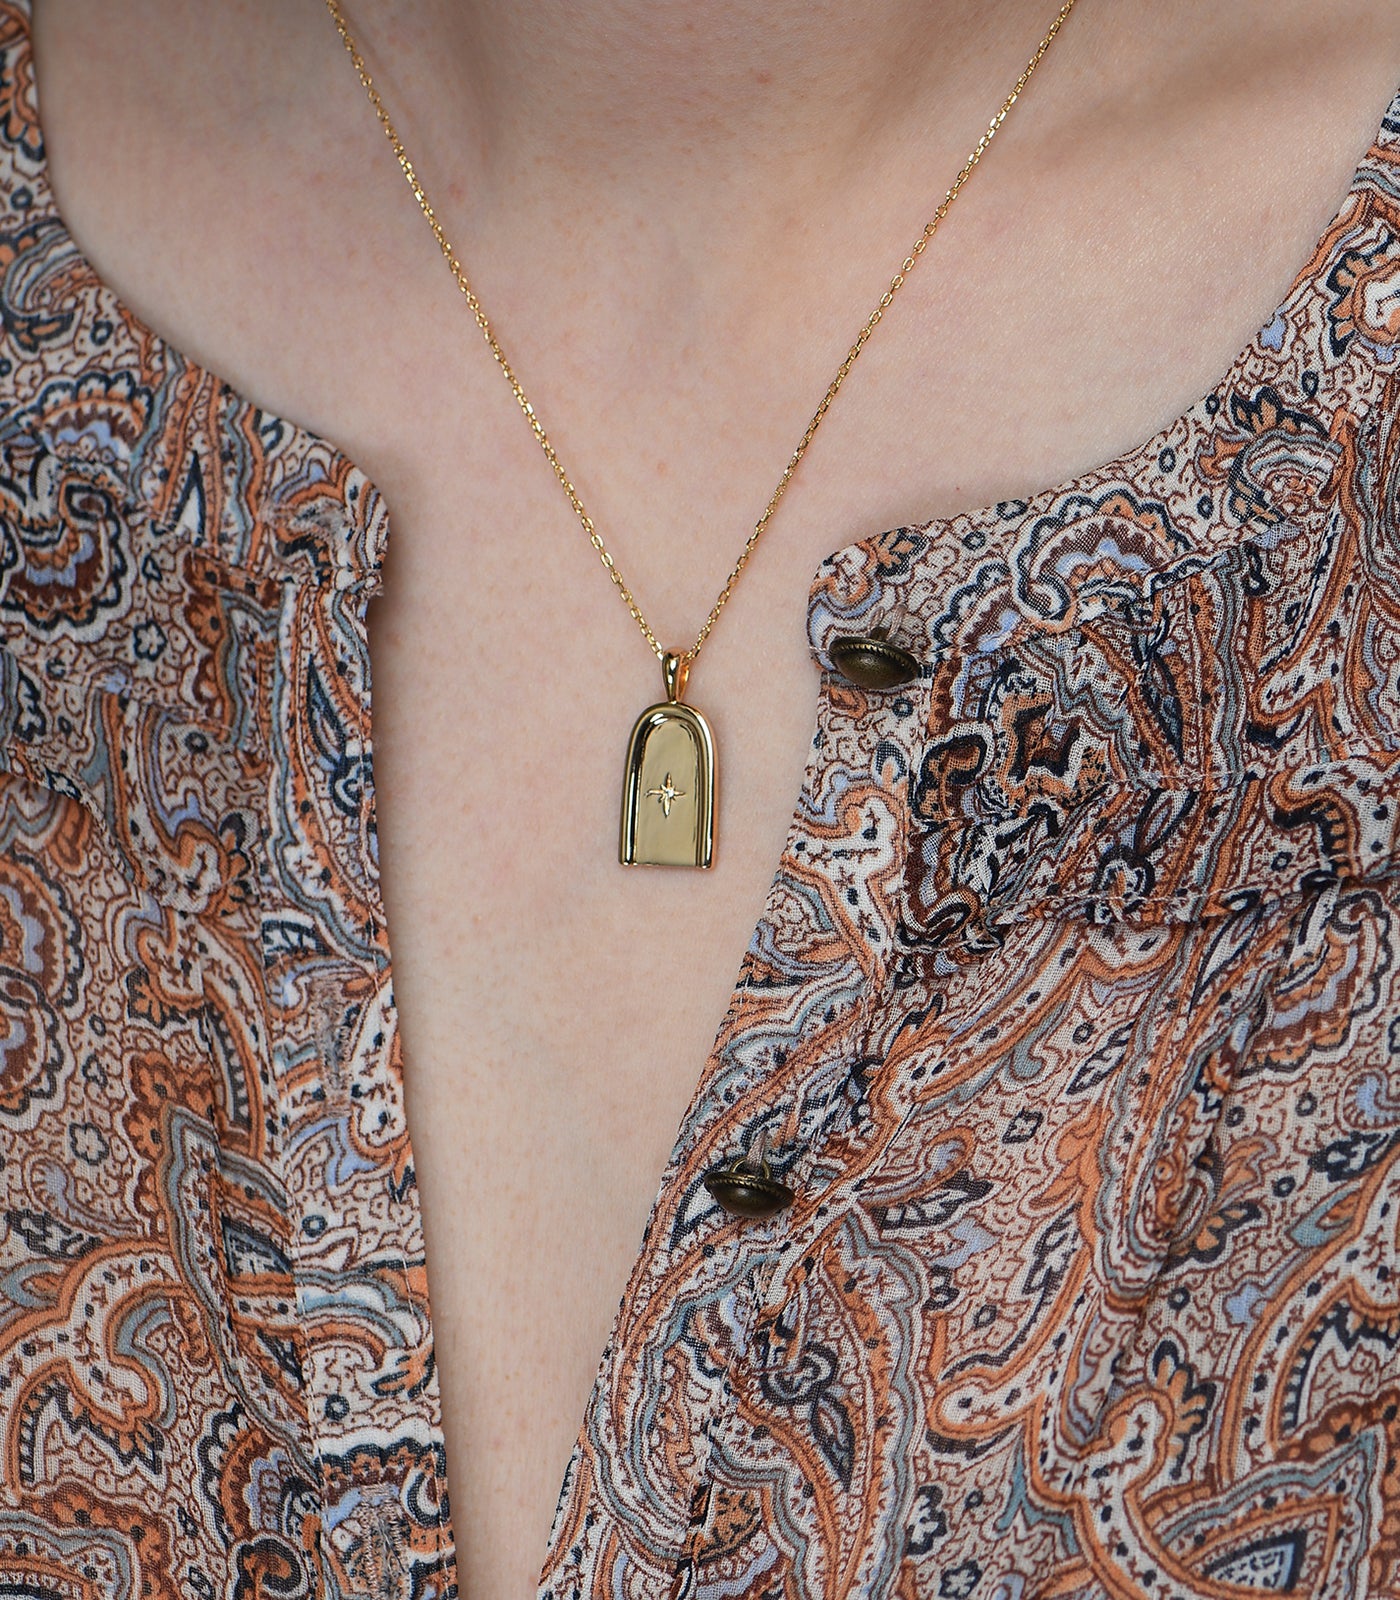 A gold vermeil necklace. The necklace has a dainty chain with an arch pendant.